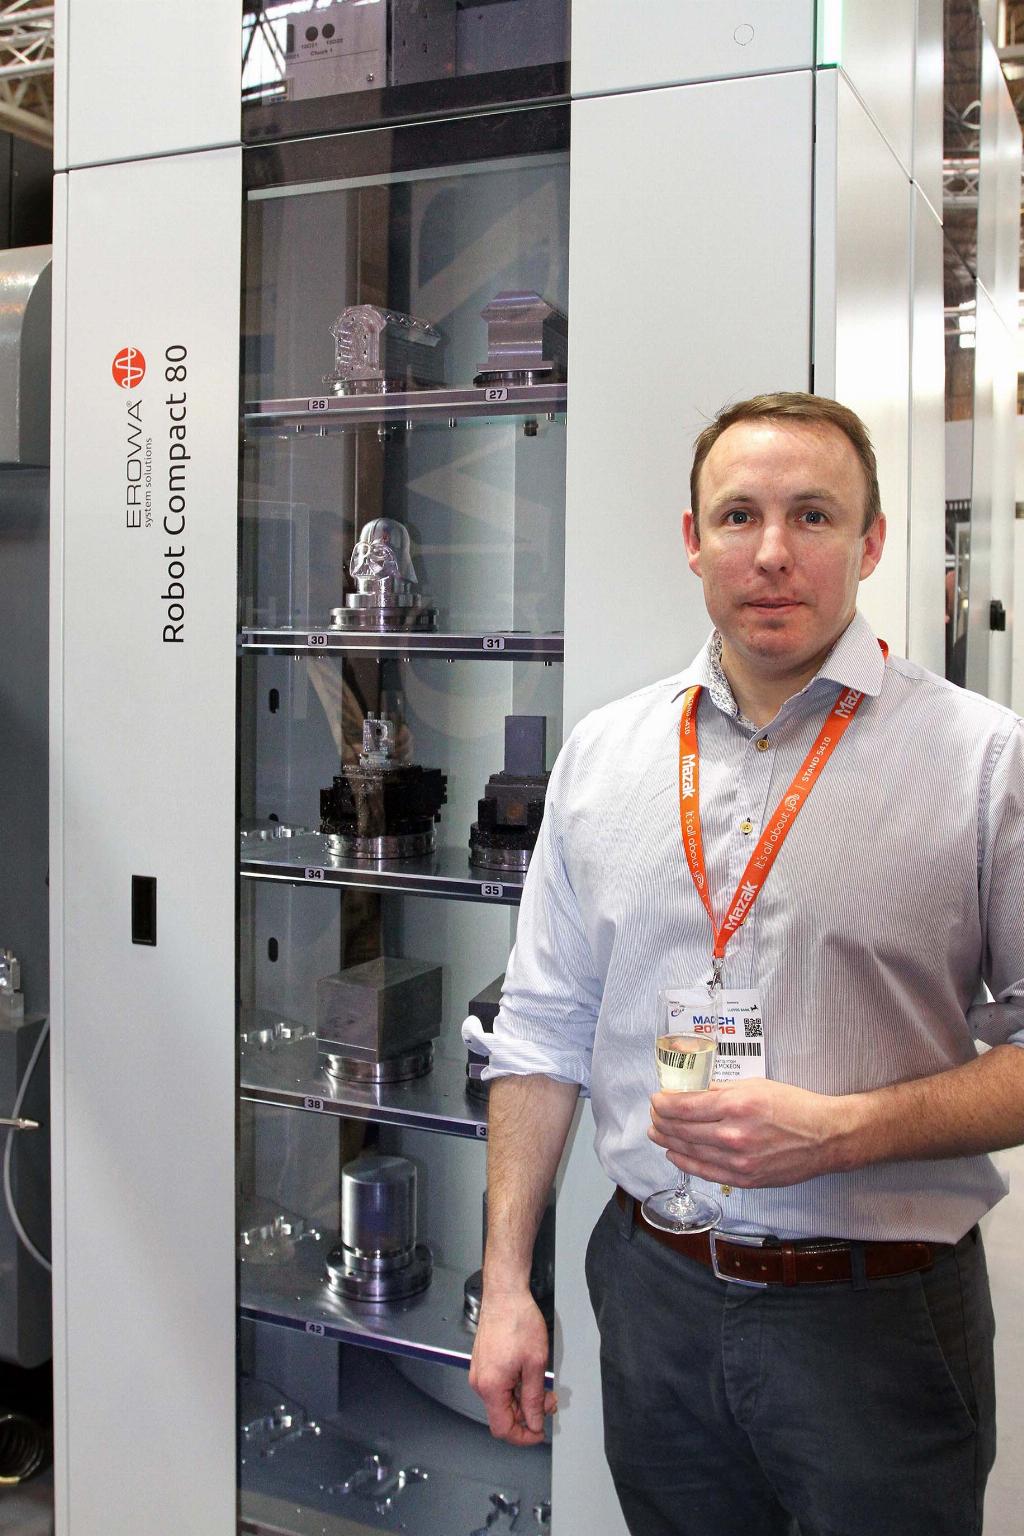 Brian McKeon, managing Director, Dawnlough in front of the Erowa Robot Compact 80 robotic pallet change system that will feed two Hurco VMX30UHSi 5-axis, high-speed machining centres at his Galway factory